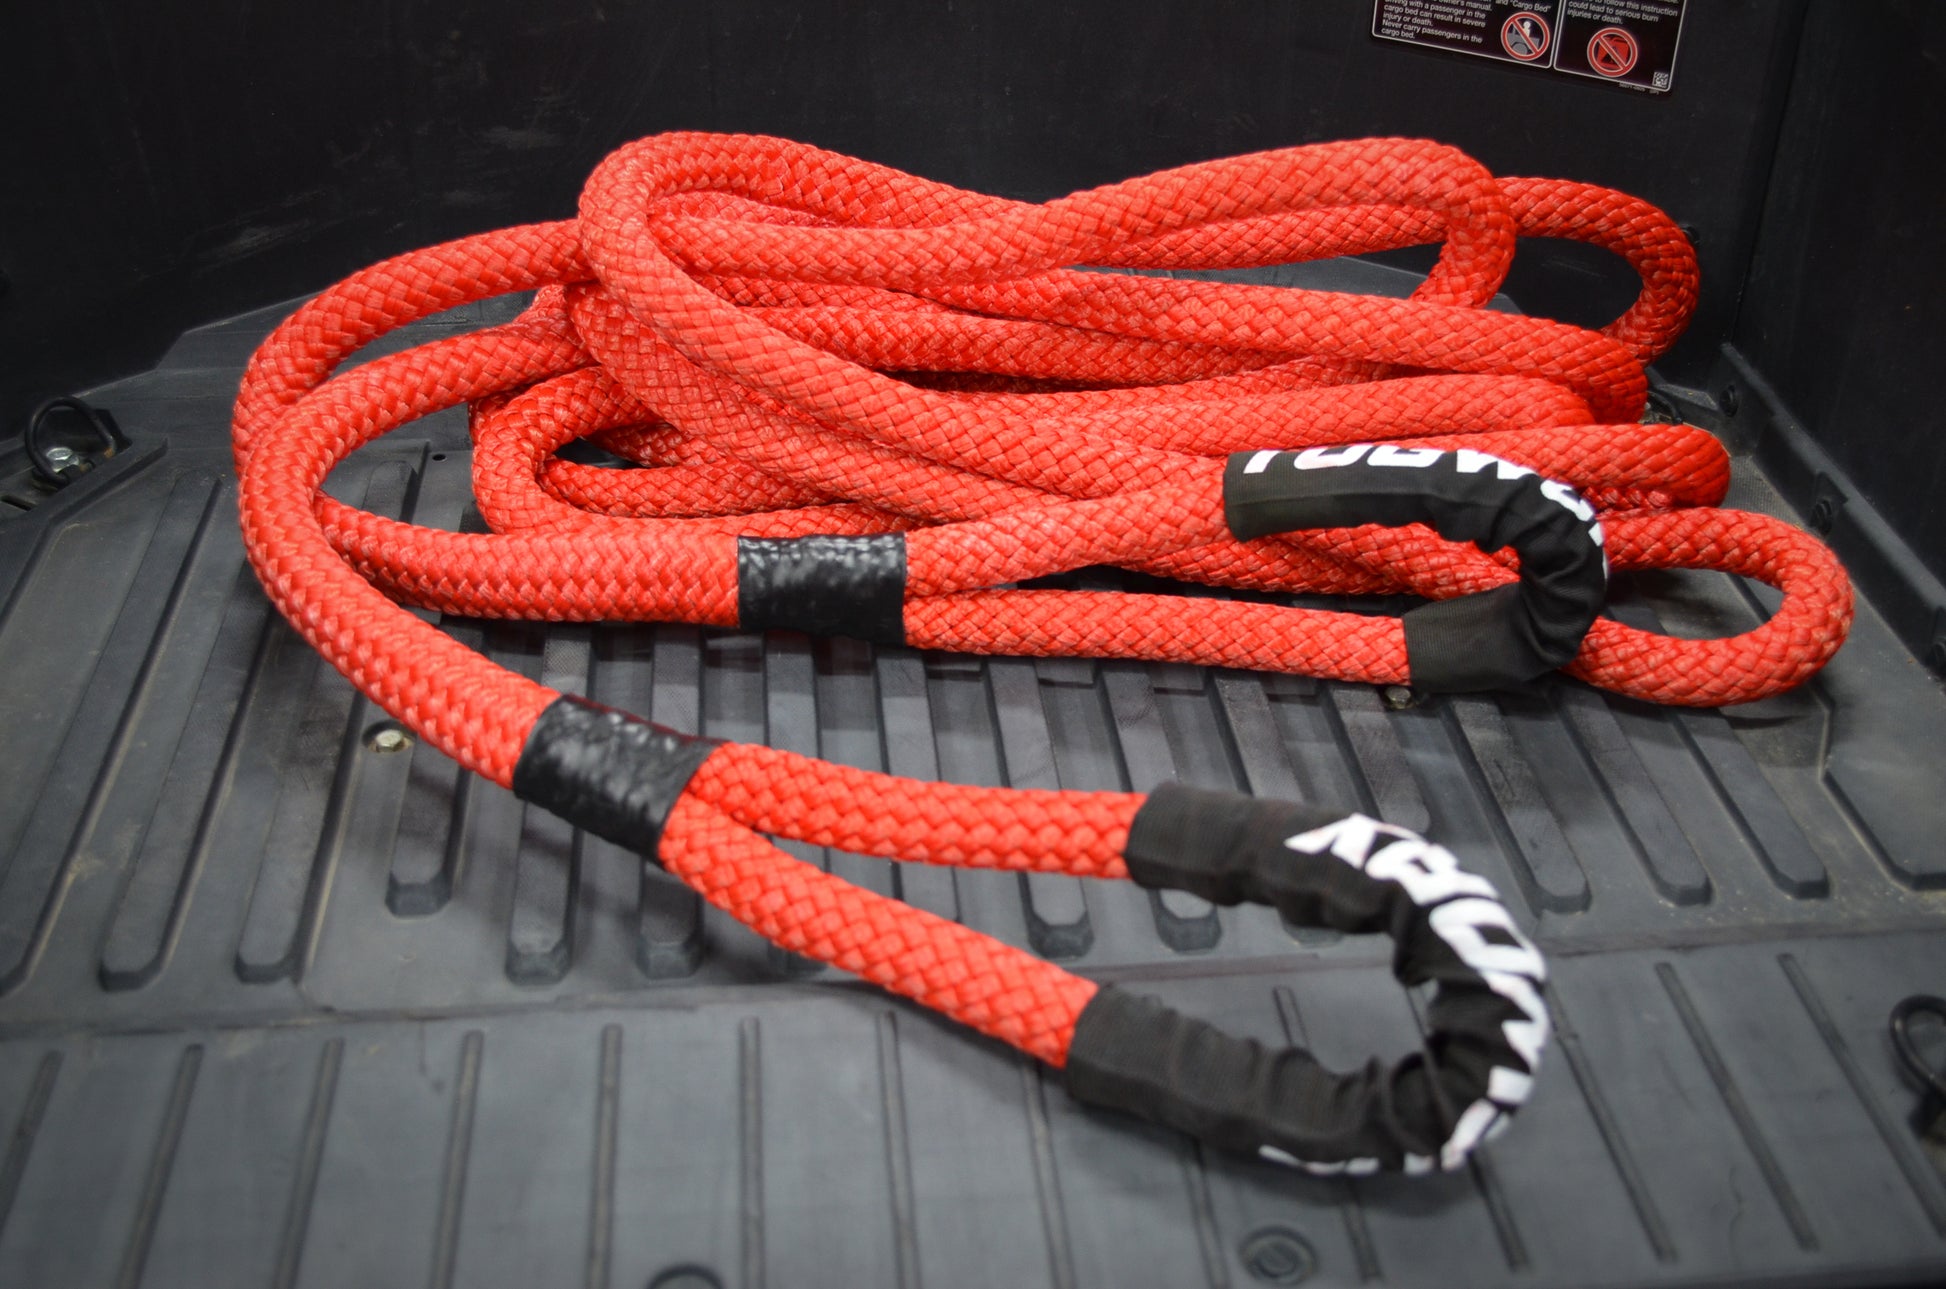 Quality Kinetic Ropes & Recovery Gear Made in the USA